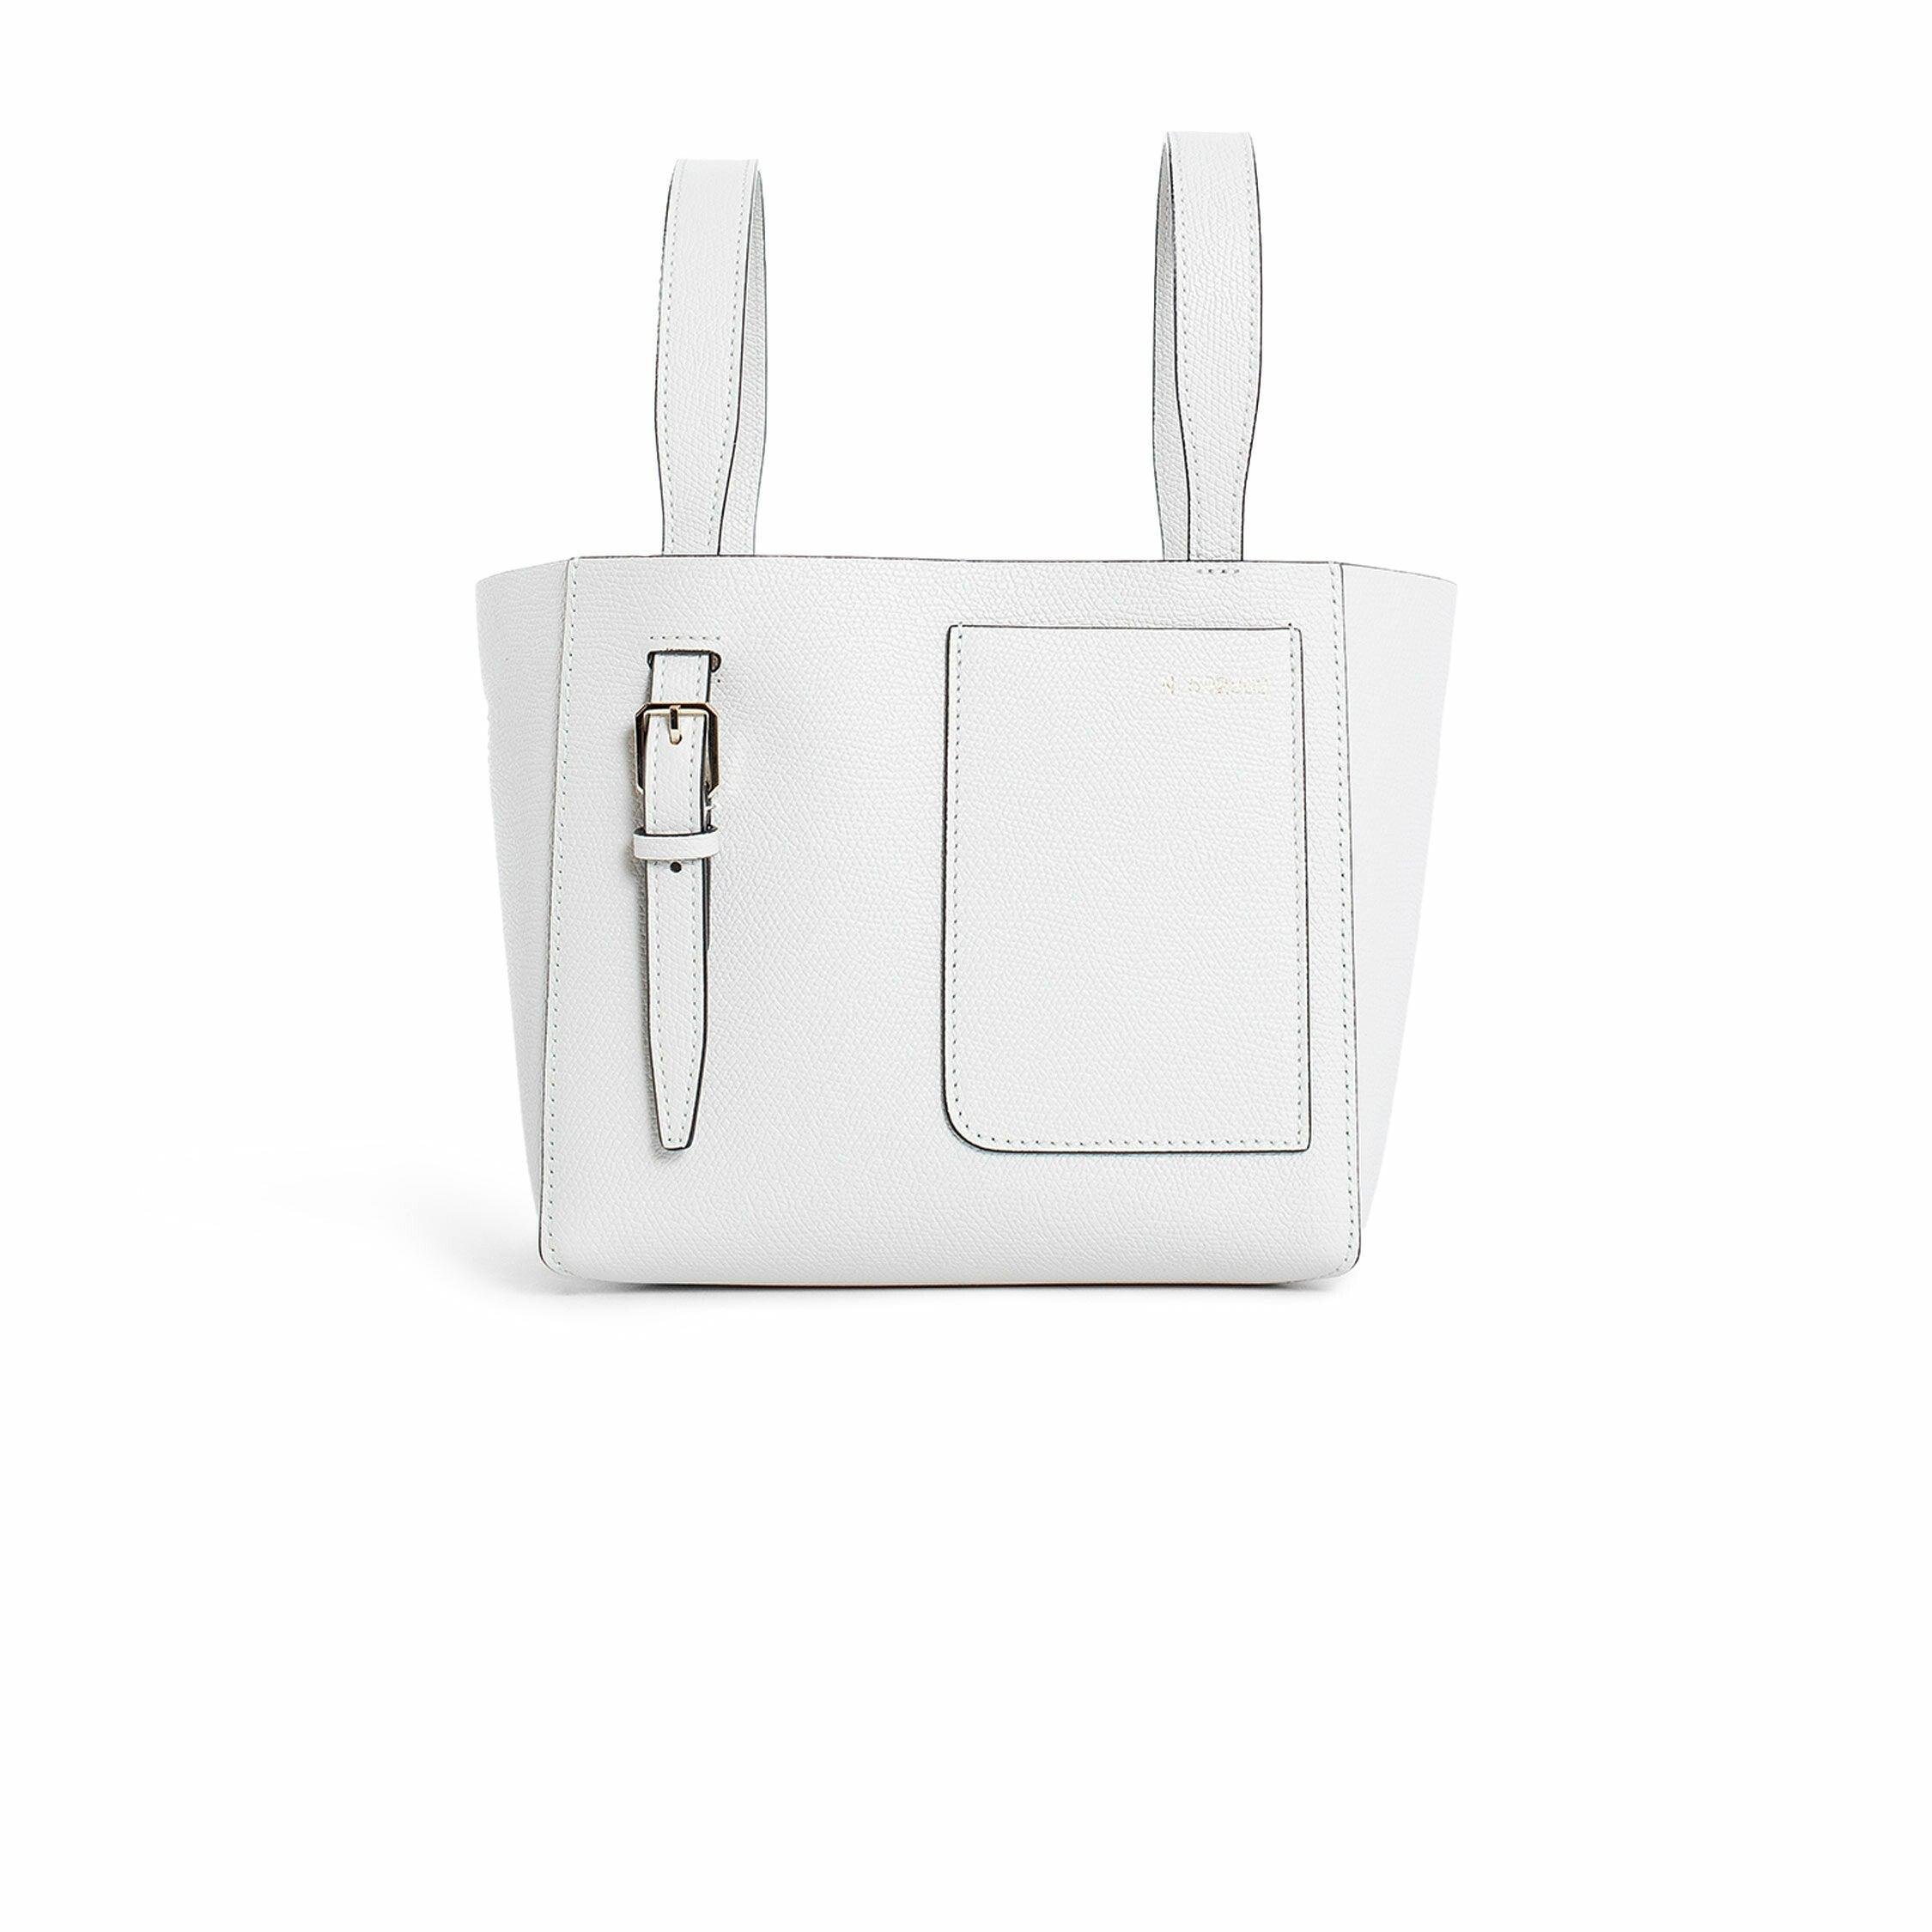 VALEXTRA WOMAN OFF-WHITE TOP HANDLE BAGS by VALEXTRA